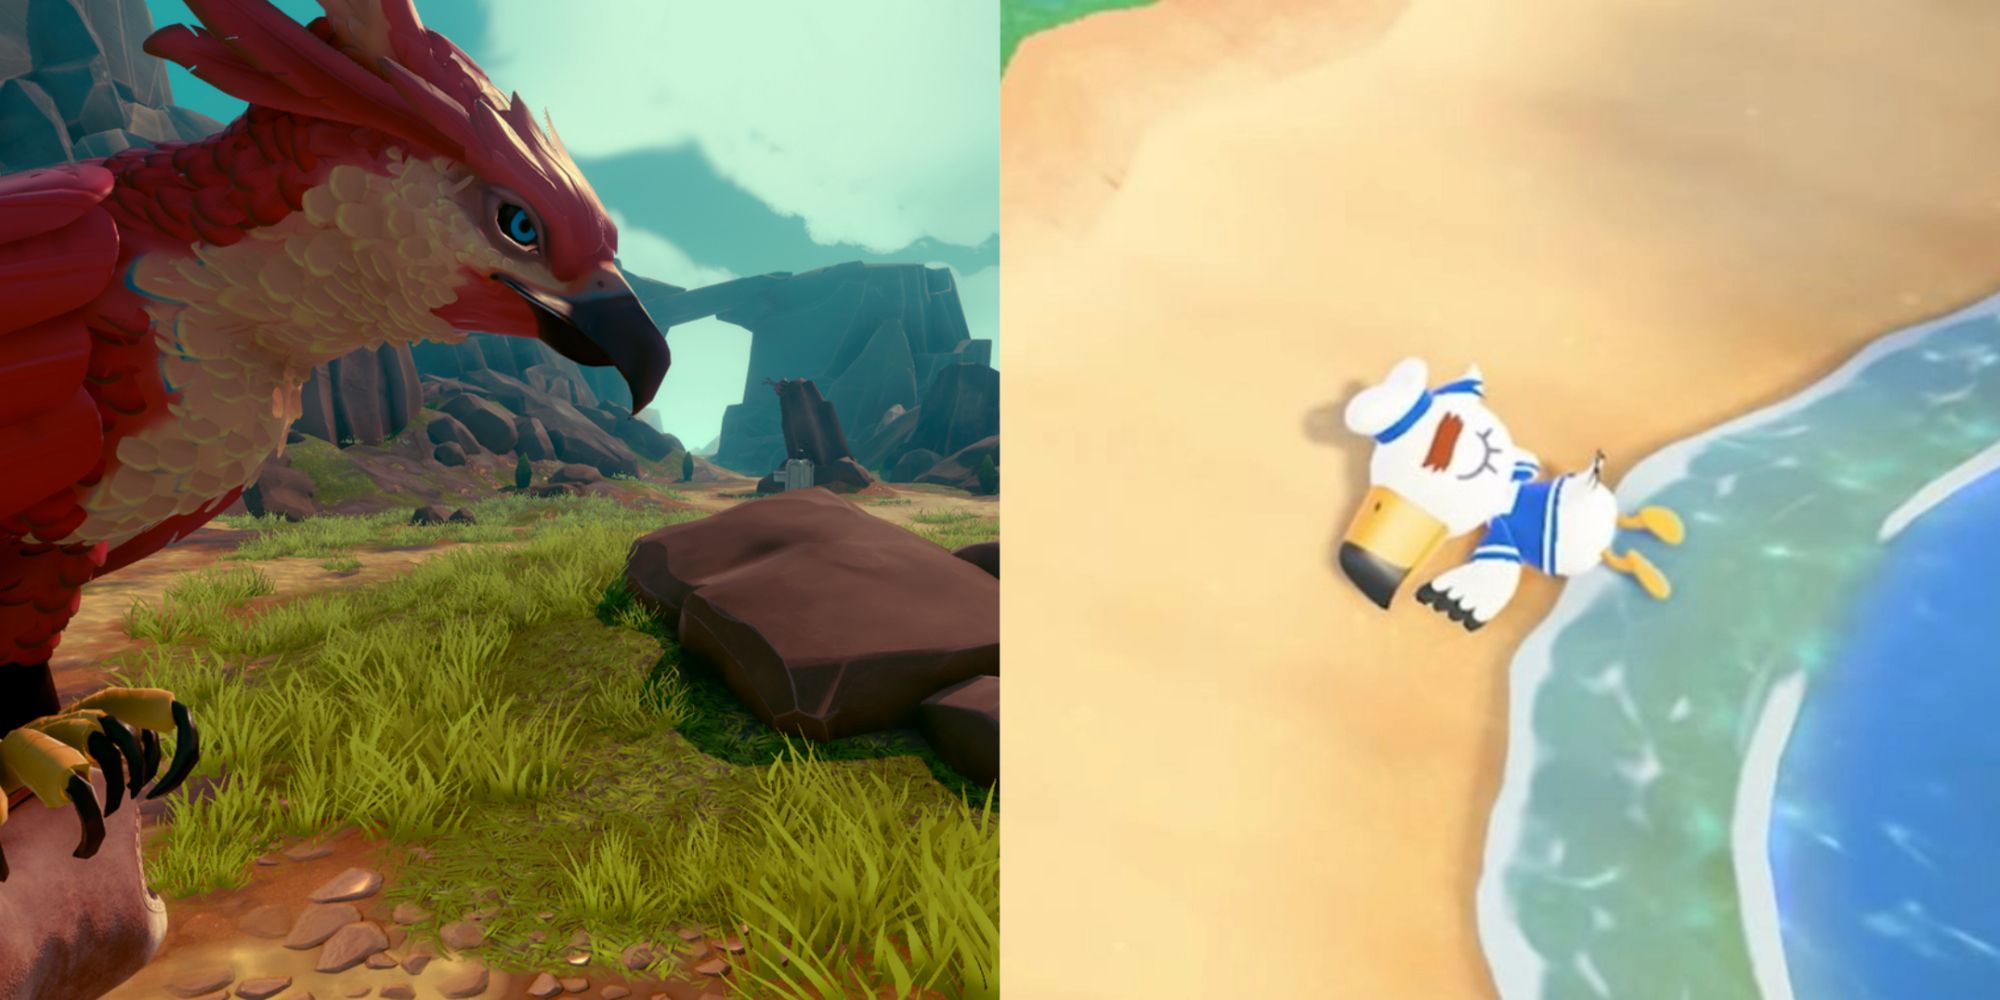 Screenshot of falcon in Falcon Age and Gulliver in Animal Crossing: New Horizons